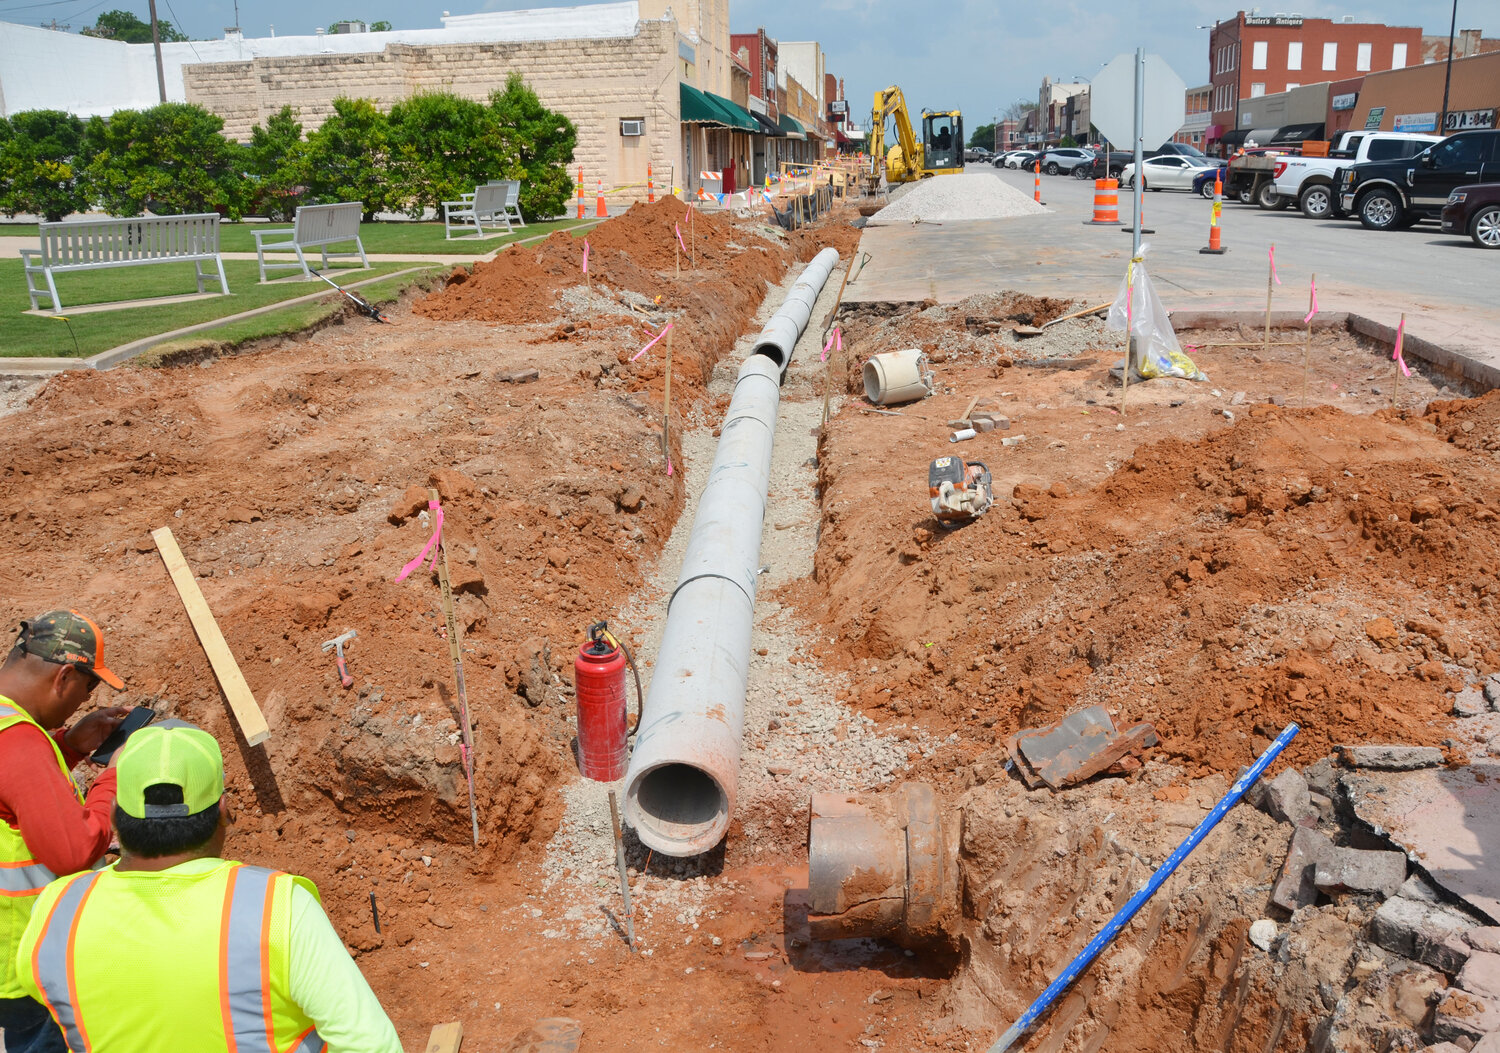 Construction crews began placing the pipes for a new drainage system on the corner of Main Street and 3rd Avenue this past Thursday. Weekly meetings will be held every Tuesday at City Hall beginning at 10 a.m. for residents looking for updates or wanting to voice any concerns related to the StreetScape project.